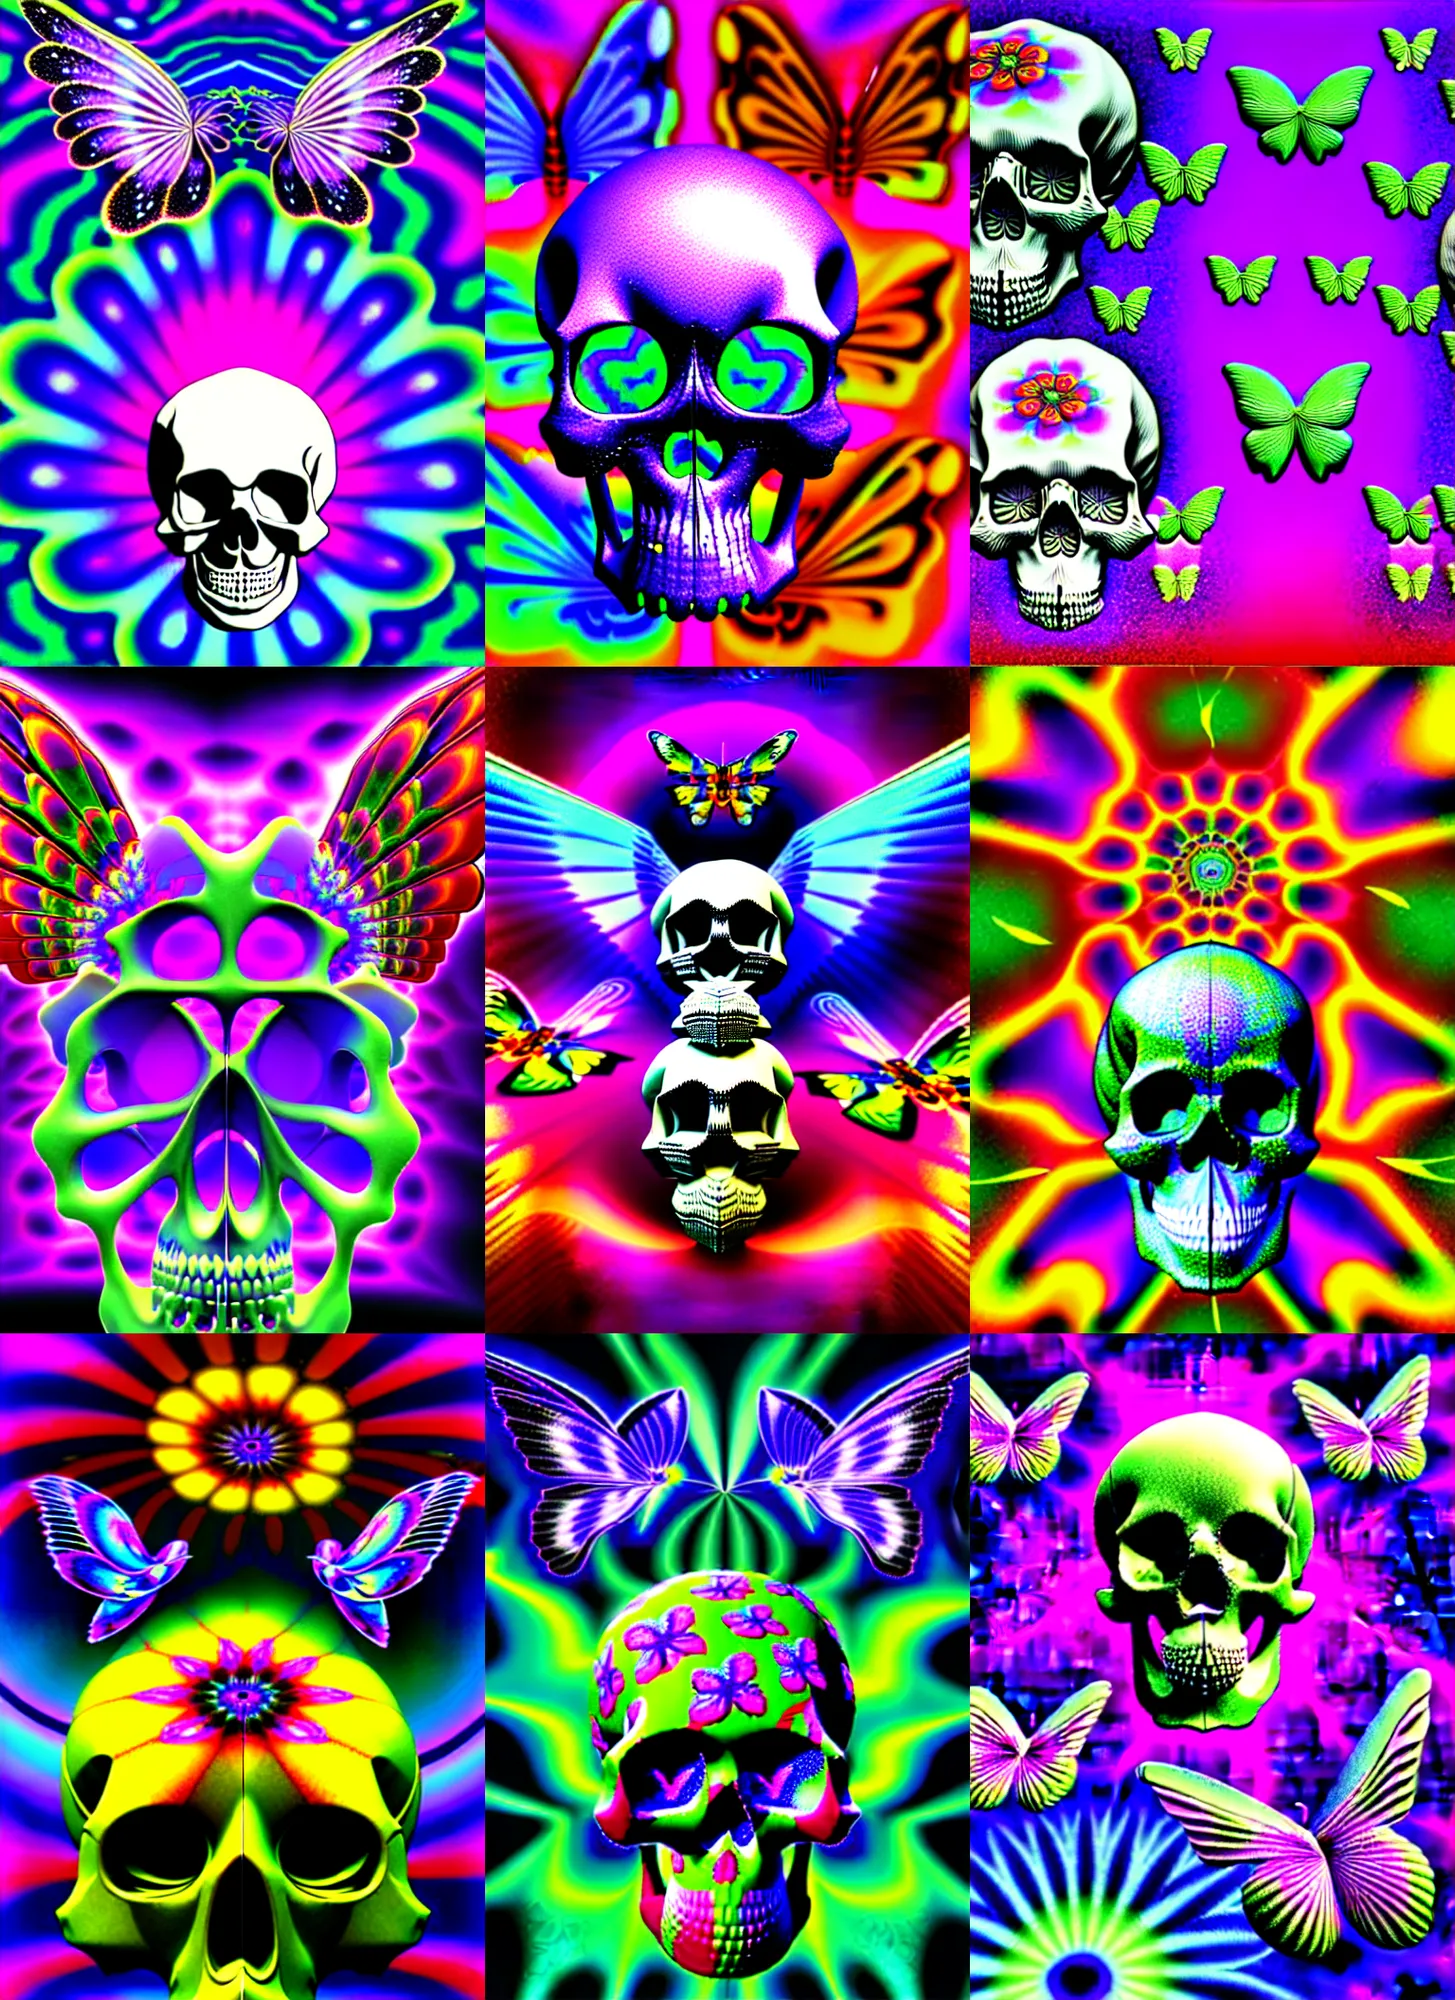 Prompt: 3 d silicon graphics render of flower in a skull e by ichiro tanida, background of angel wings against a psychedelic acid background with 3 d butterflies and 3 d flowers in the style of early three dimensional computer graphics 3 d rendered y 2 k aesthetic